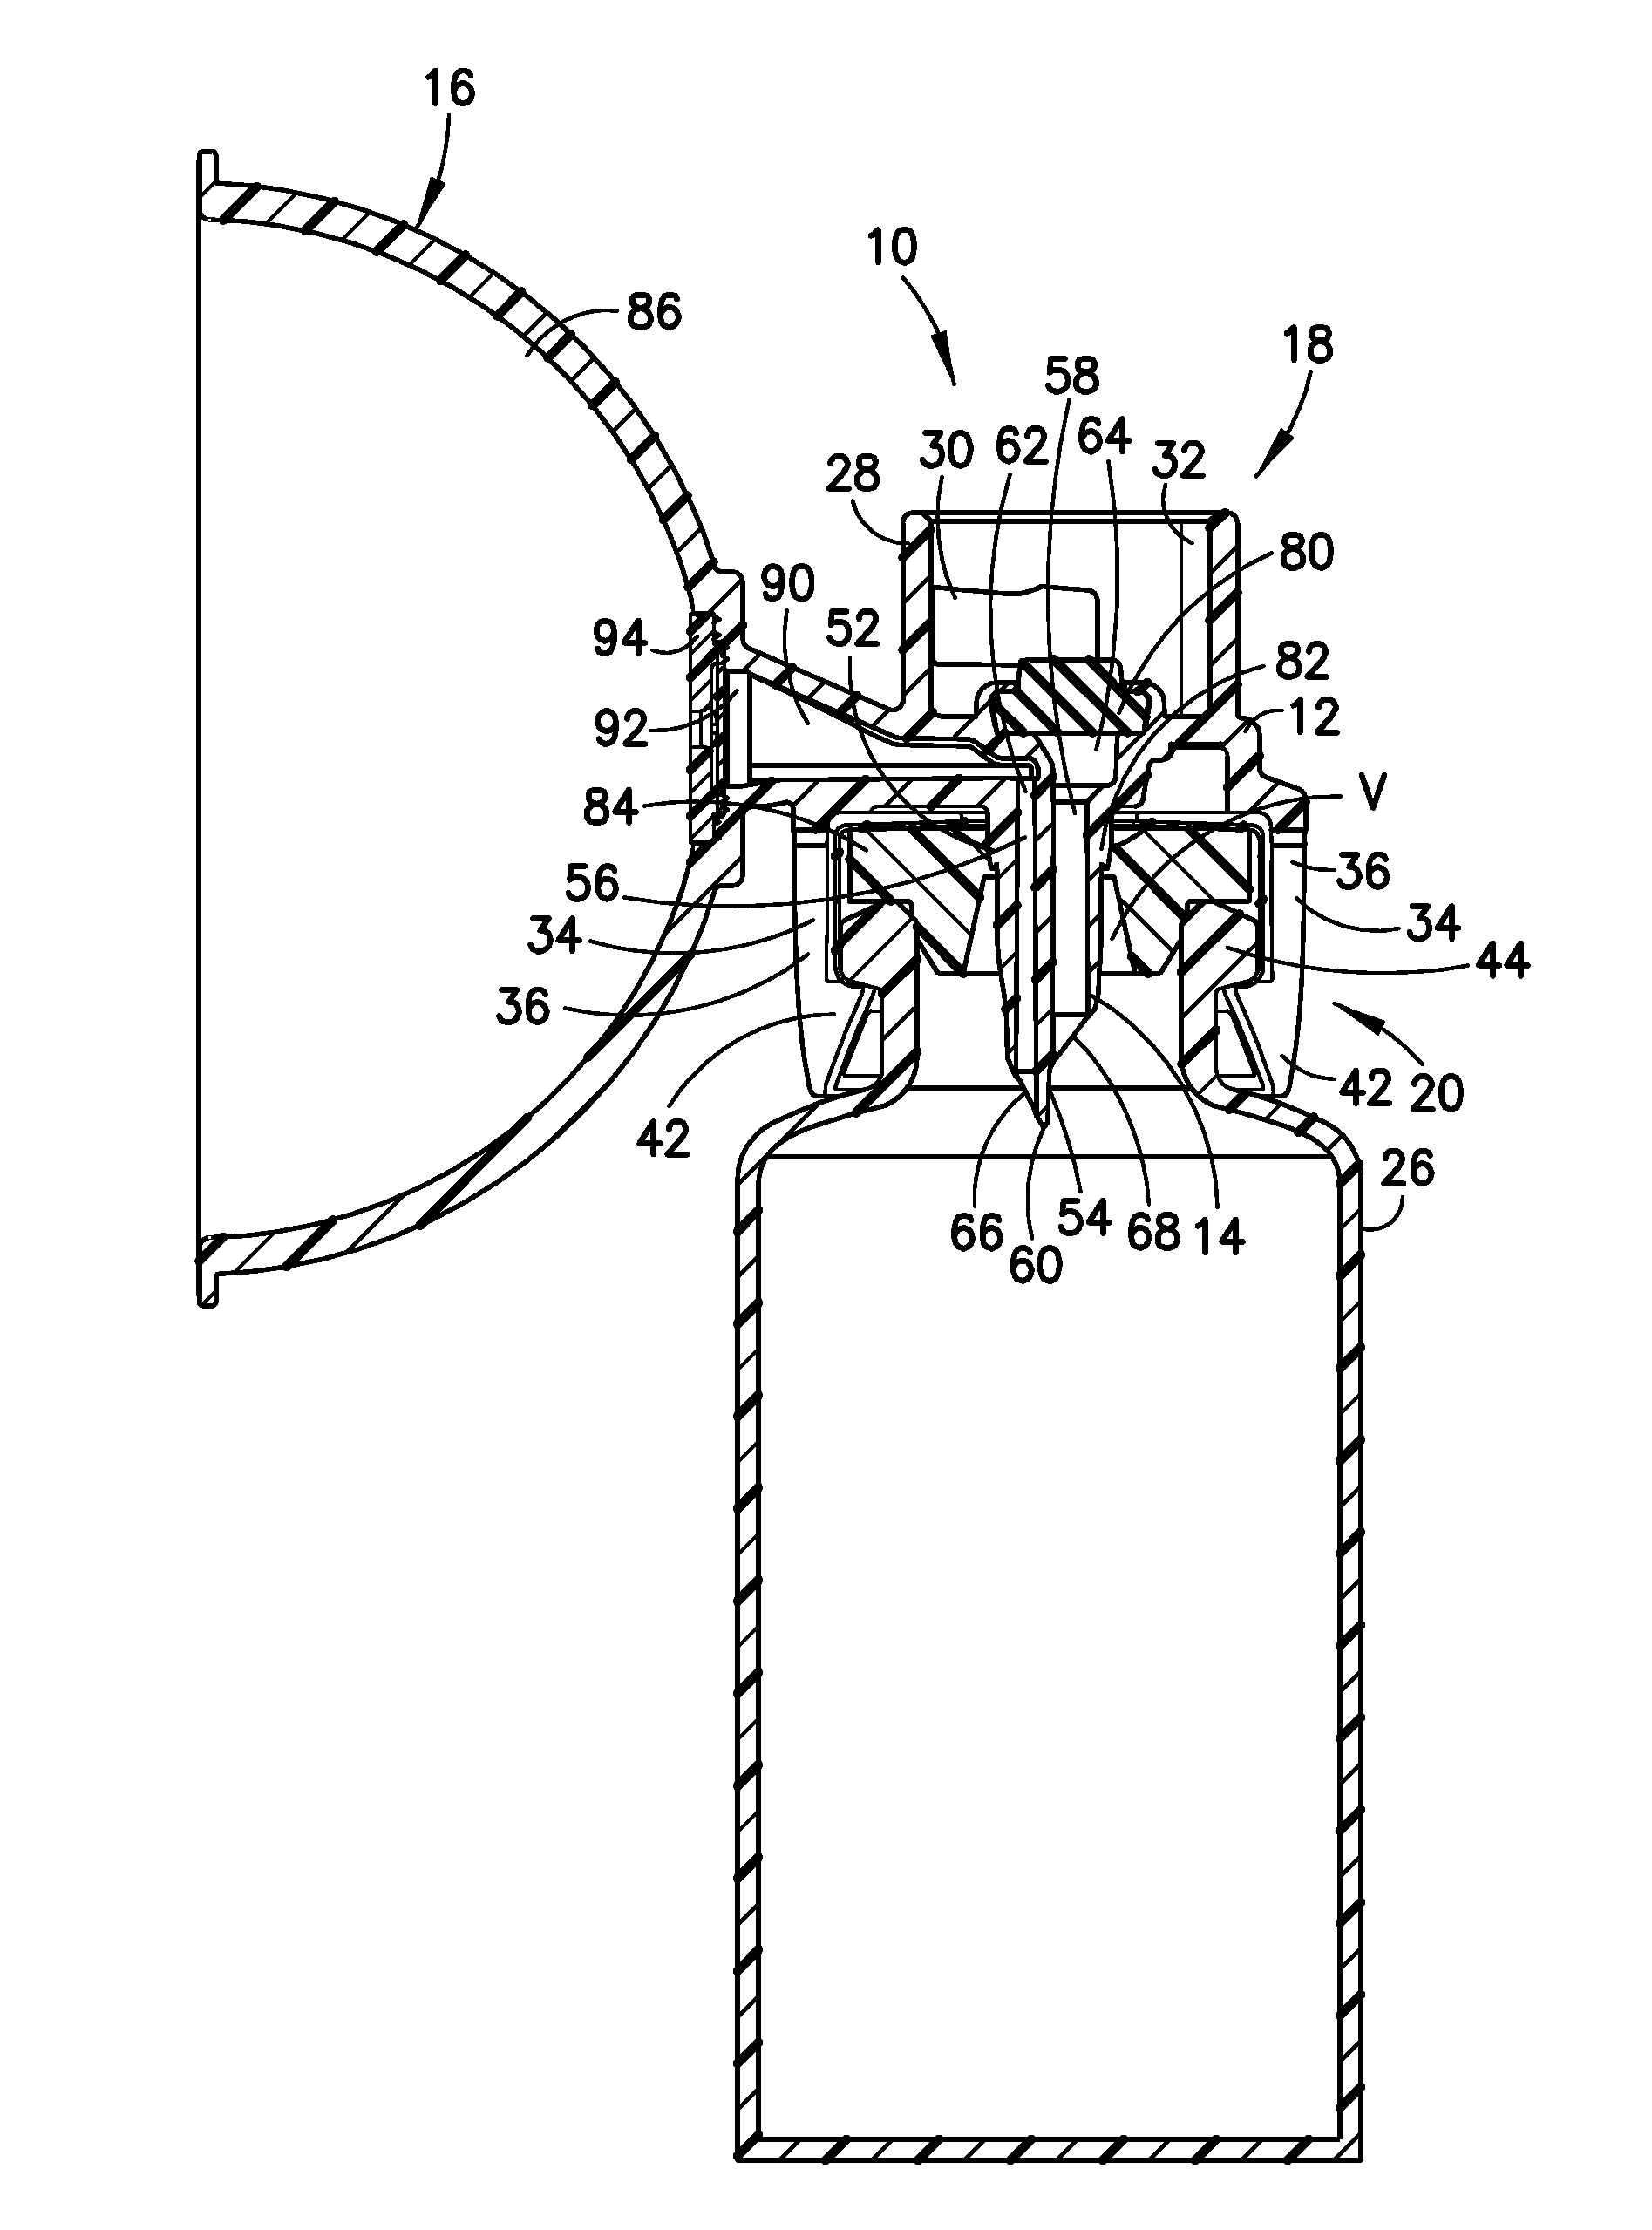 Medical Vial Access Device with Pressure Equalization and Closed Drug Transfer System and Method Utilizing Same